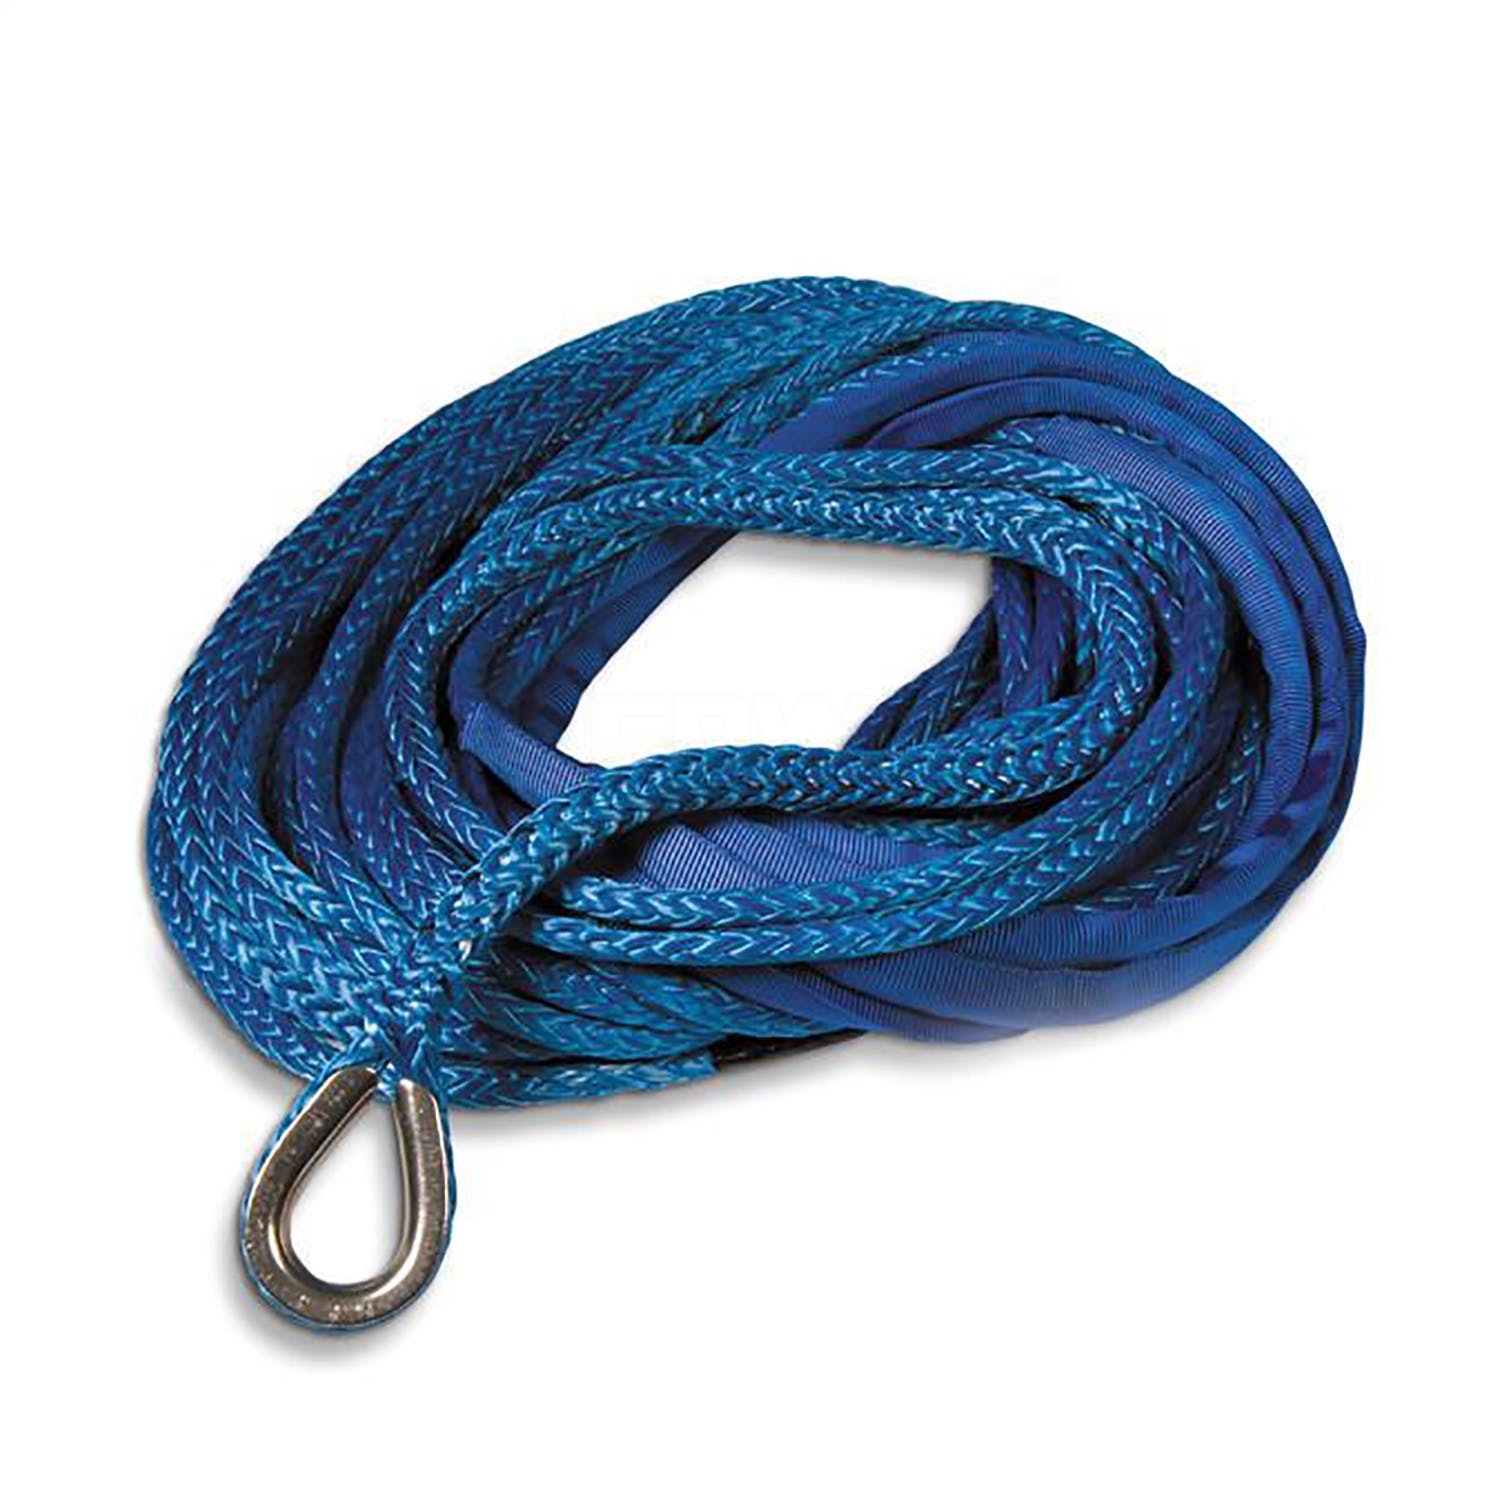 Superwinch 90-24506 Replacement Synthetic Dyneema Rope 3/8 diameter x 80 length